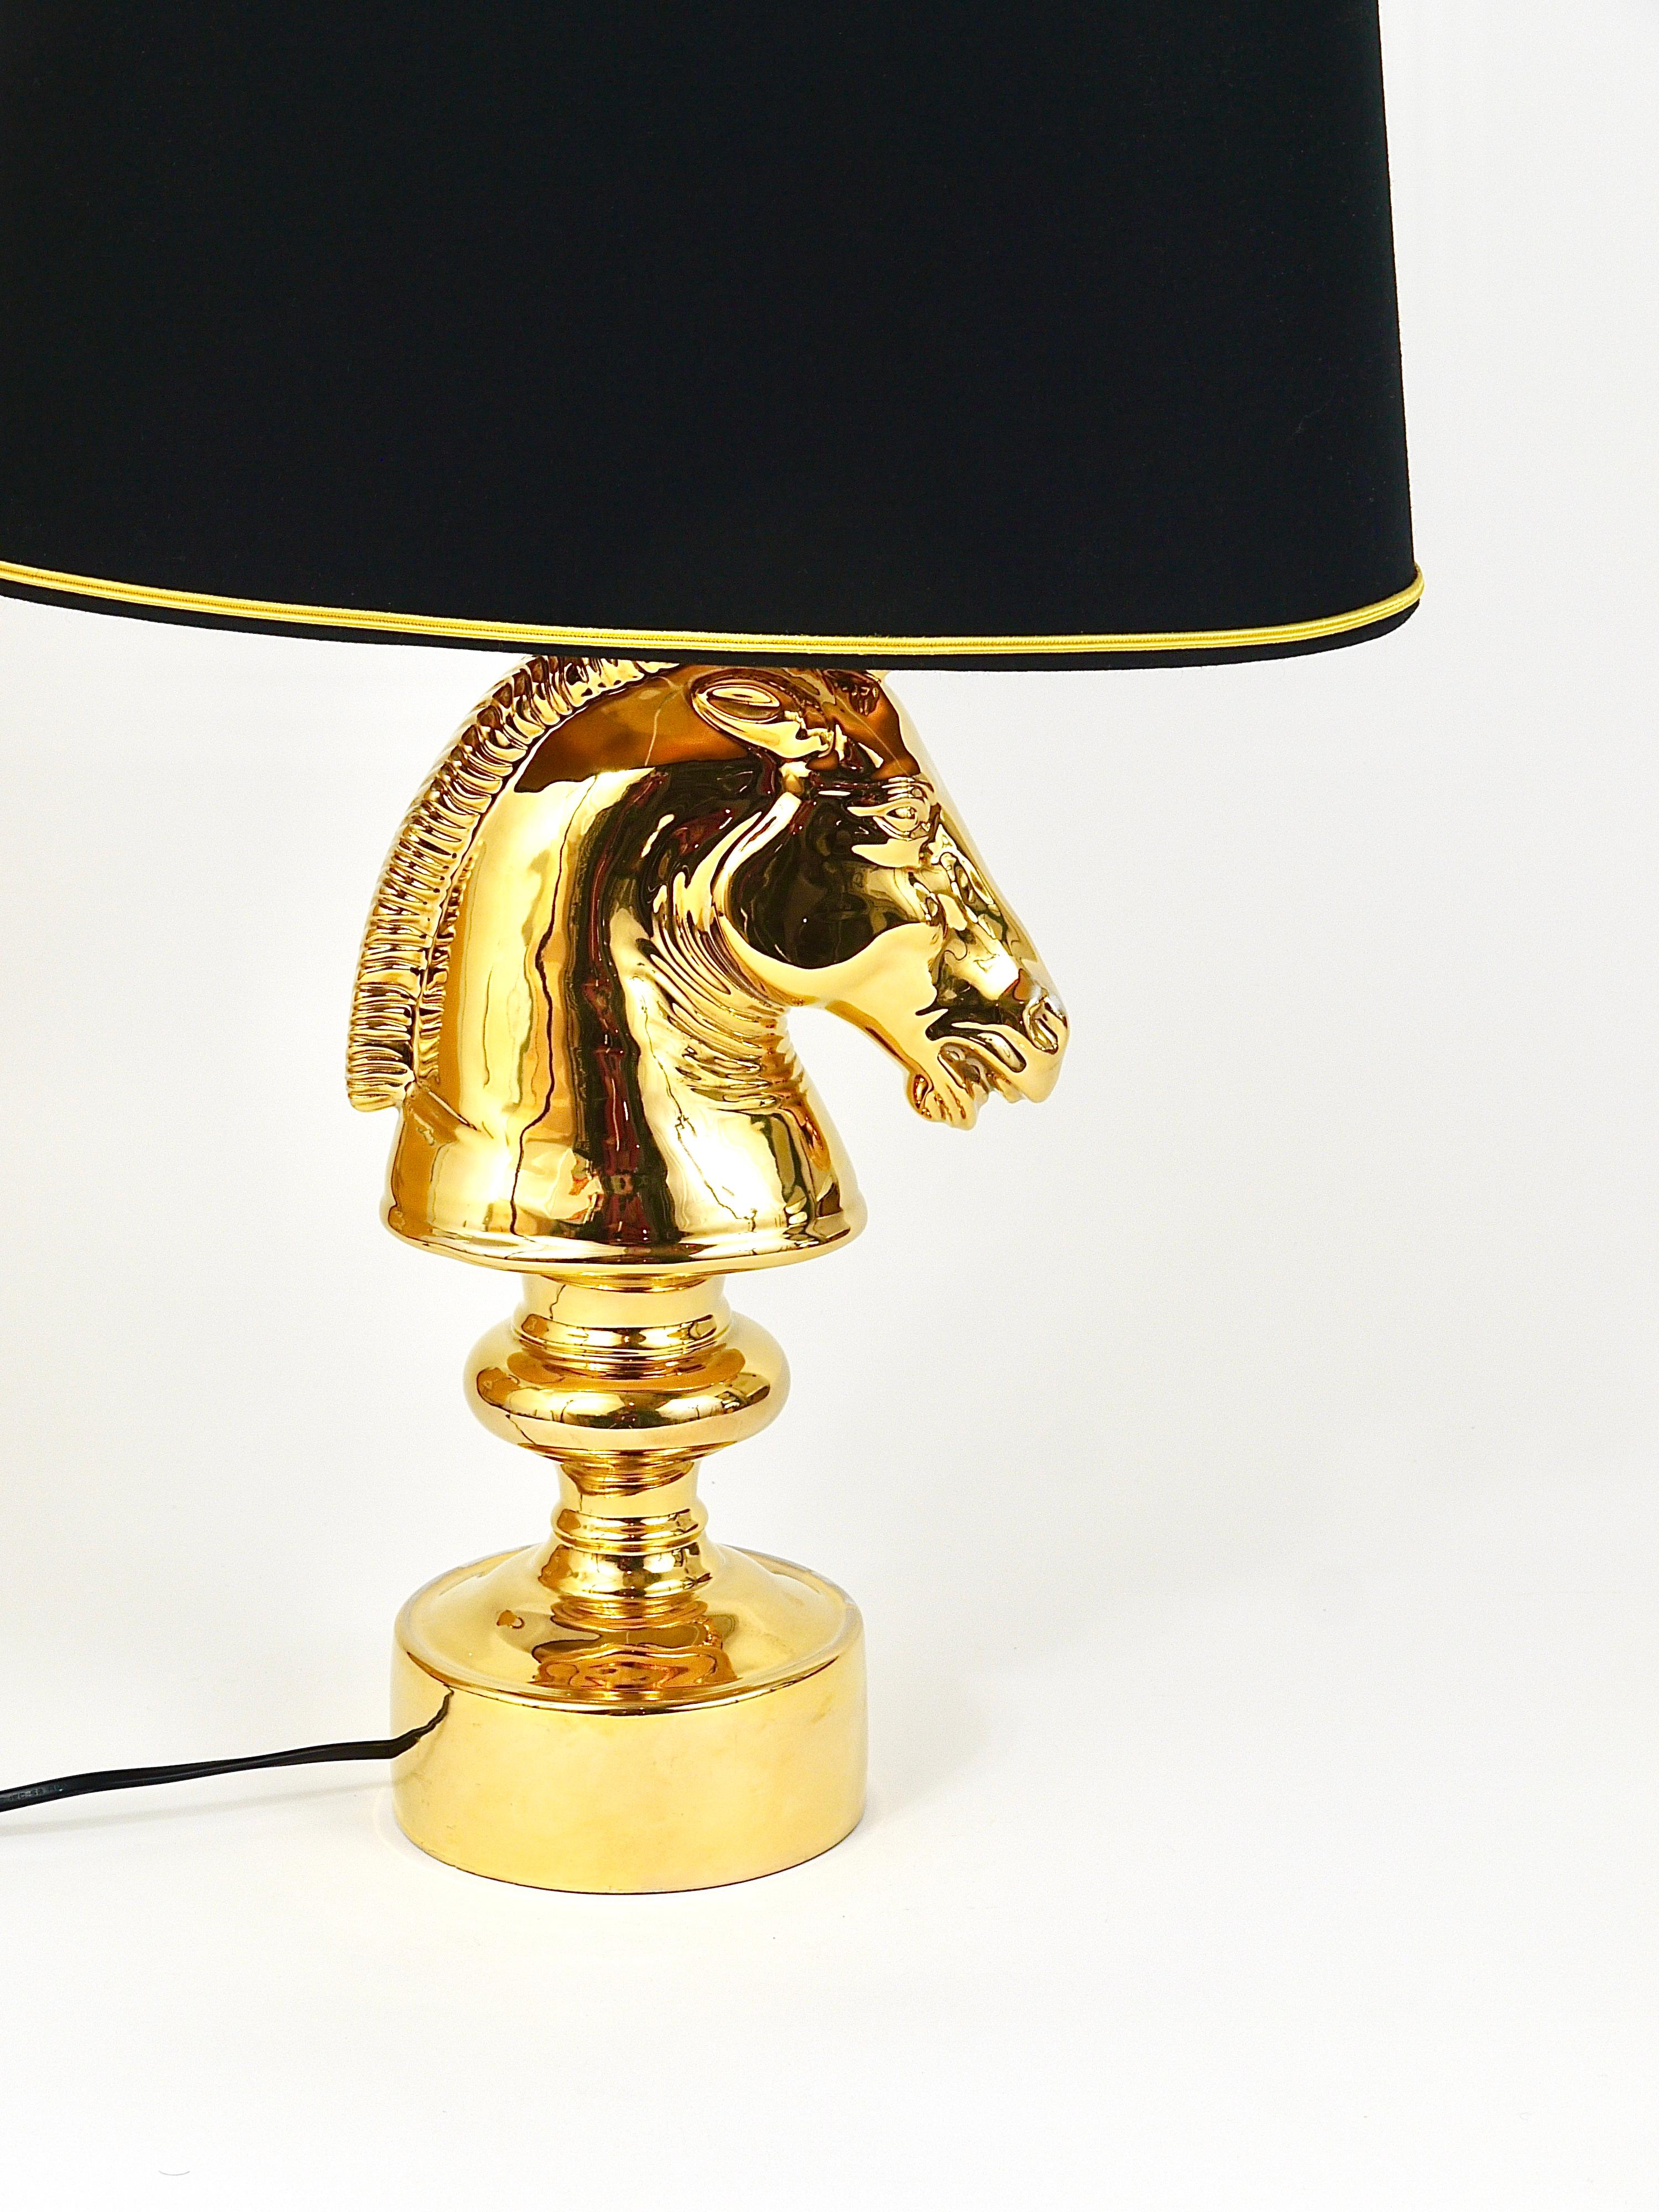 Golden Hollywood Regency Horse Sculpture Table or Side Lamp, Italy, 1970s For Sale 5